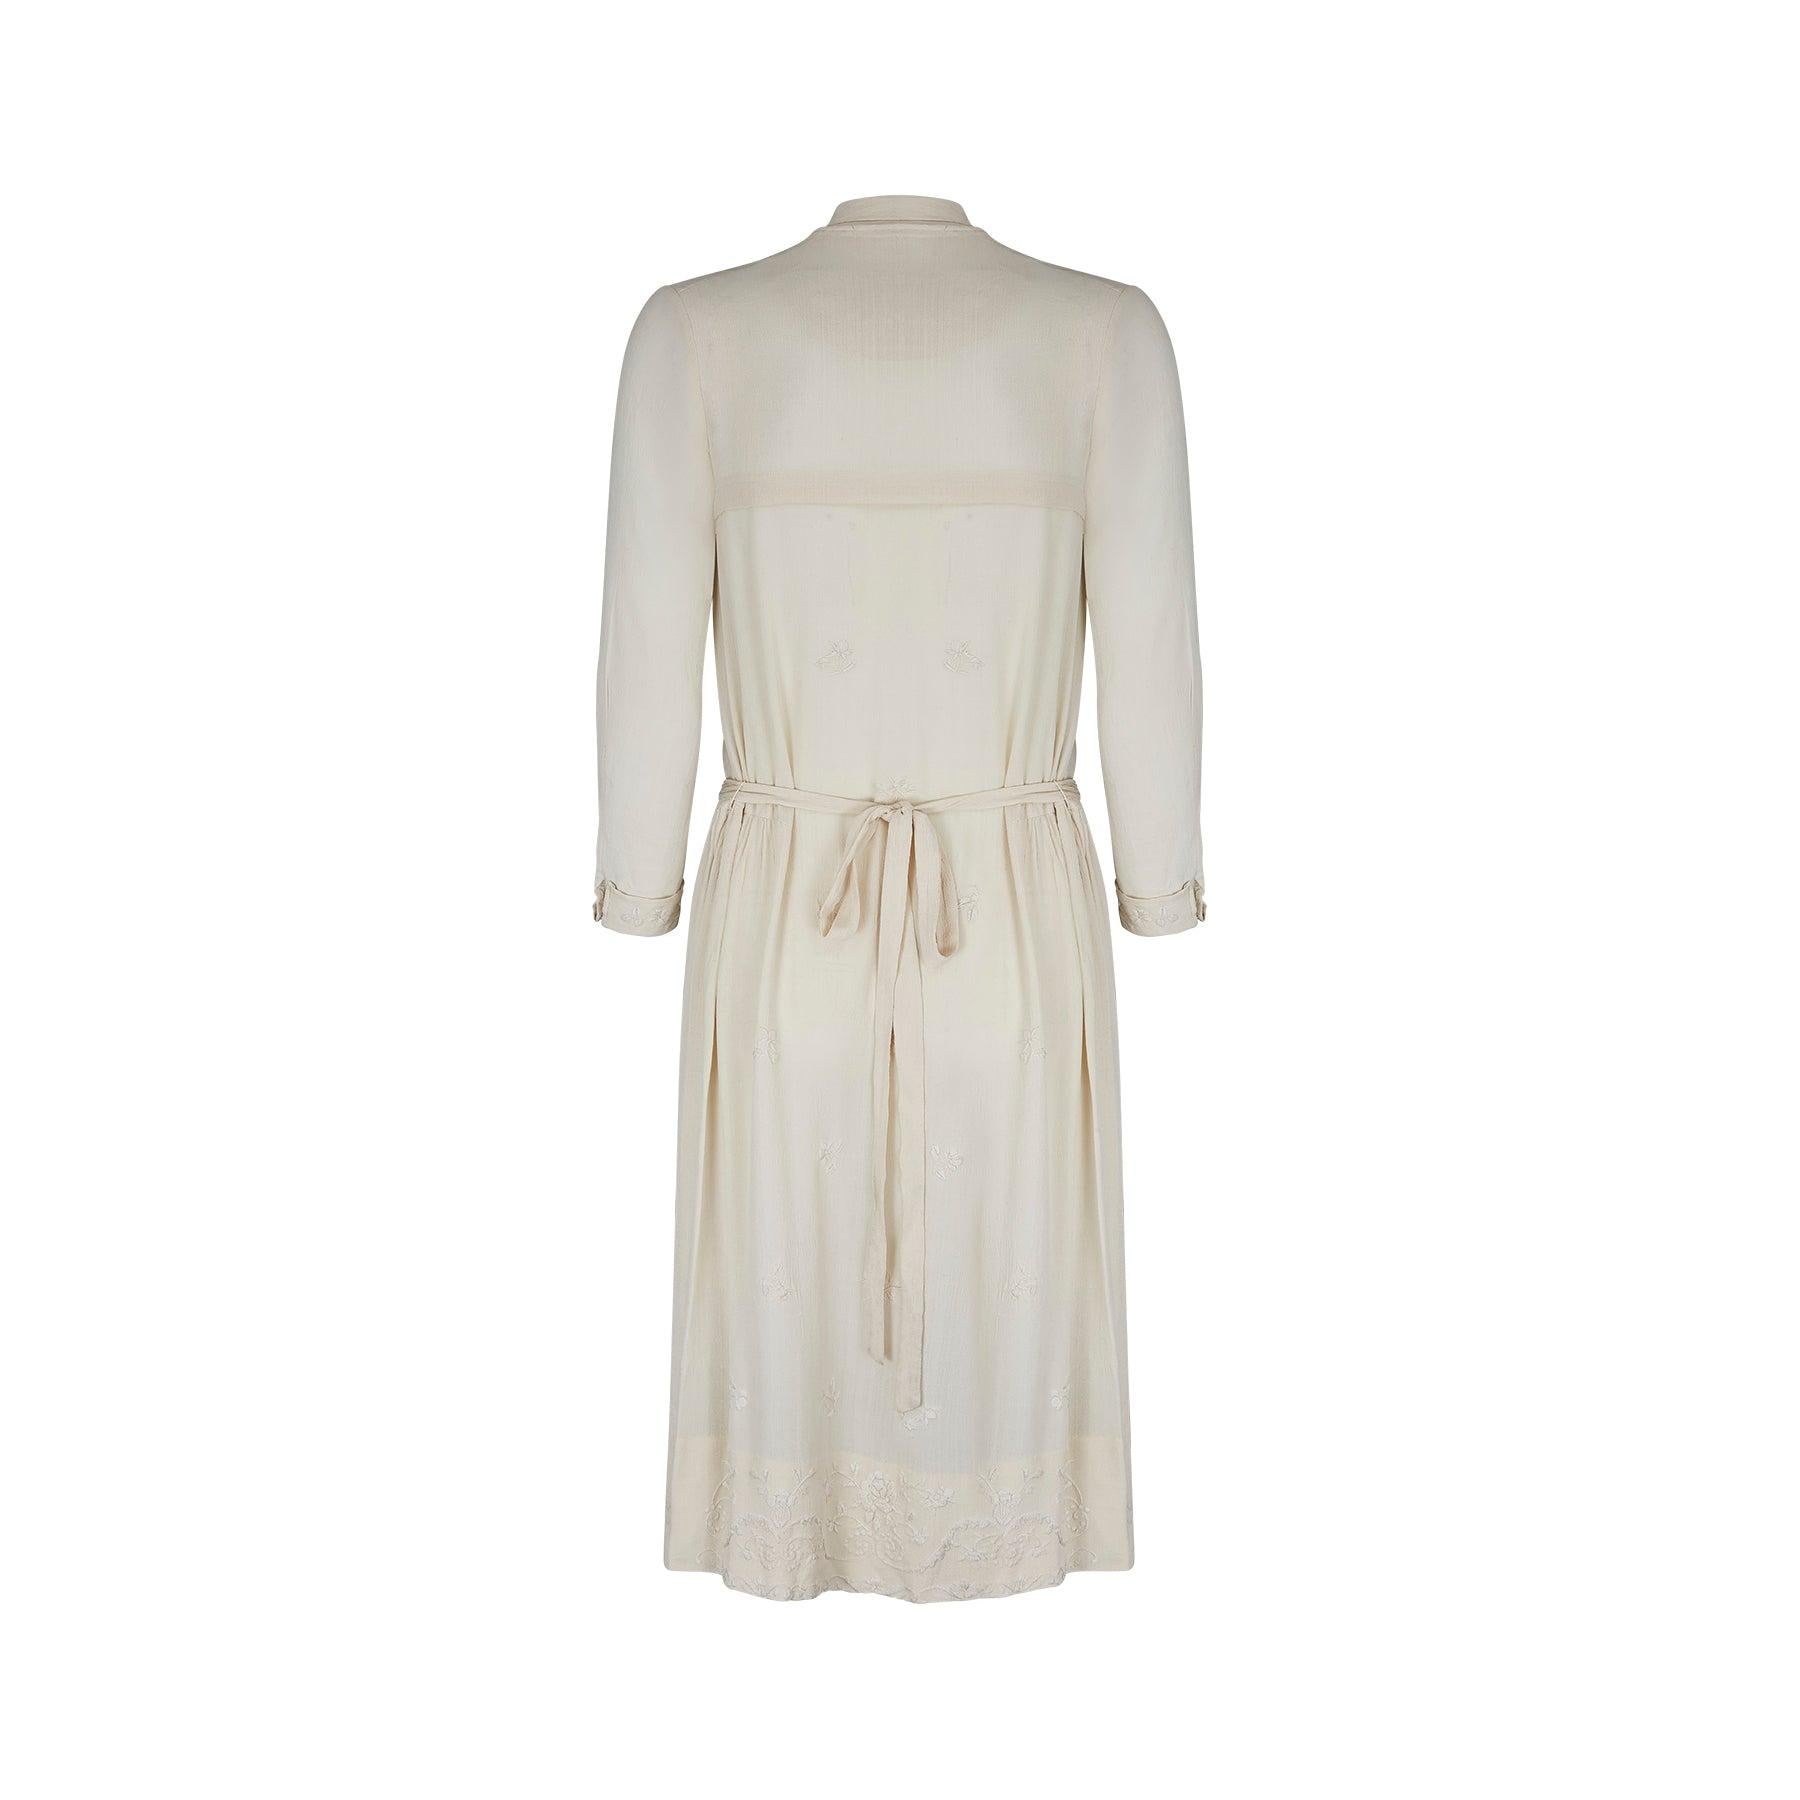 Gray 1920s Silk Cream Floral Embroidered Dress